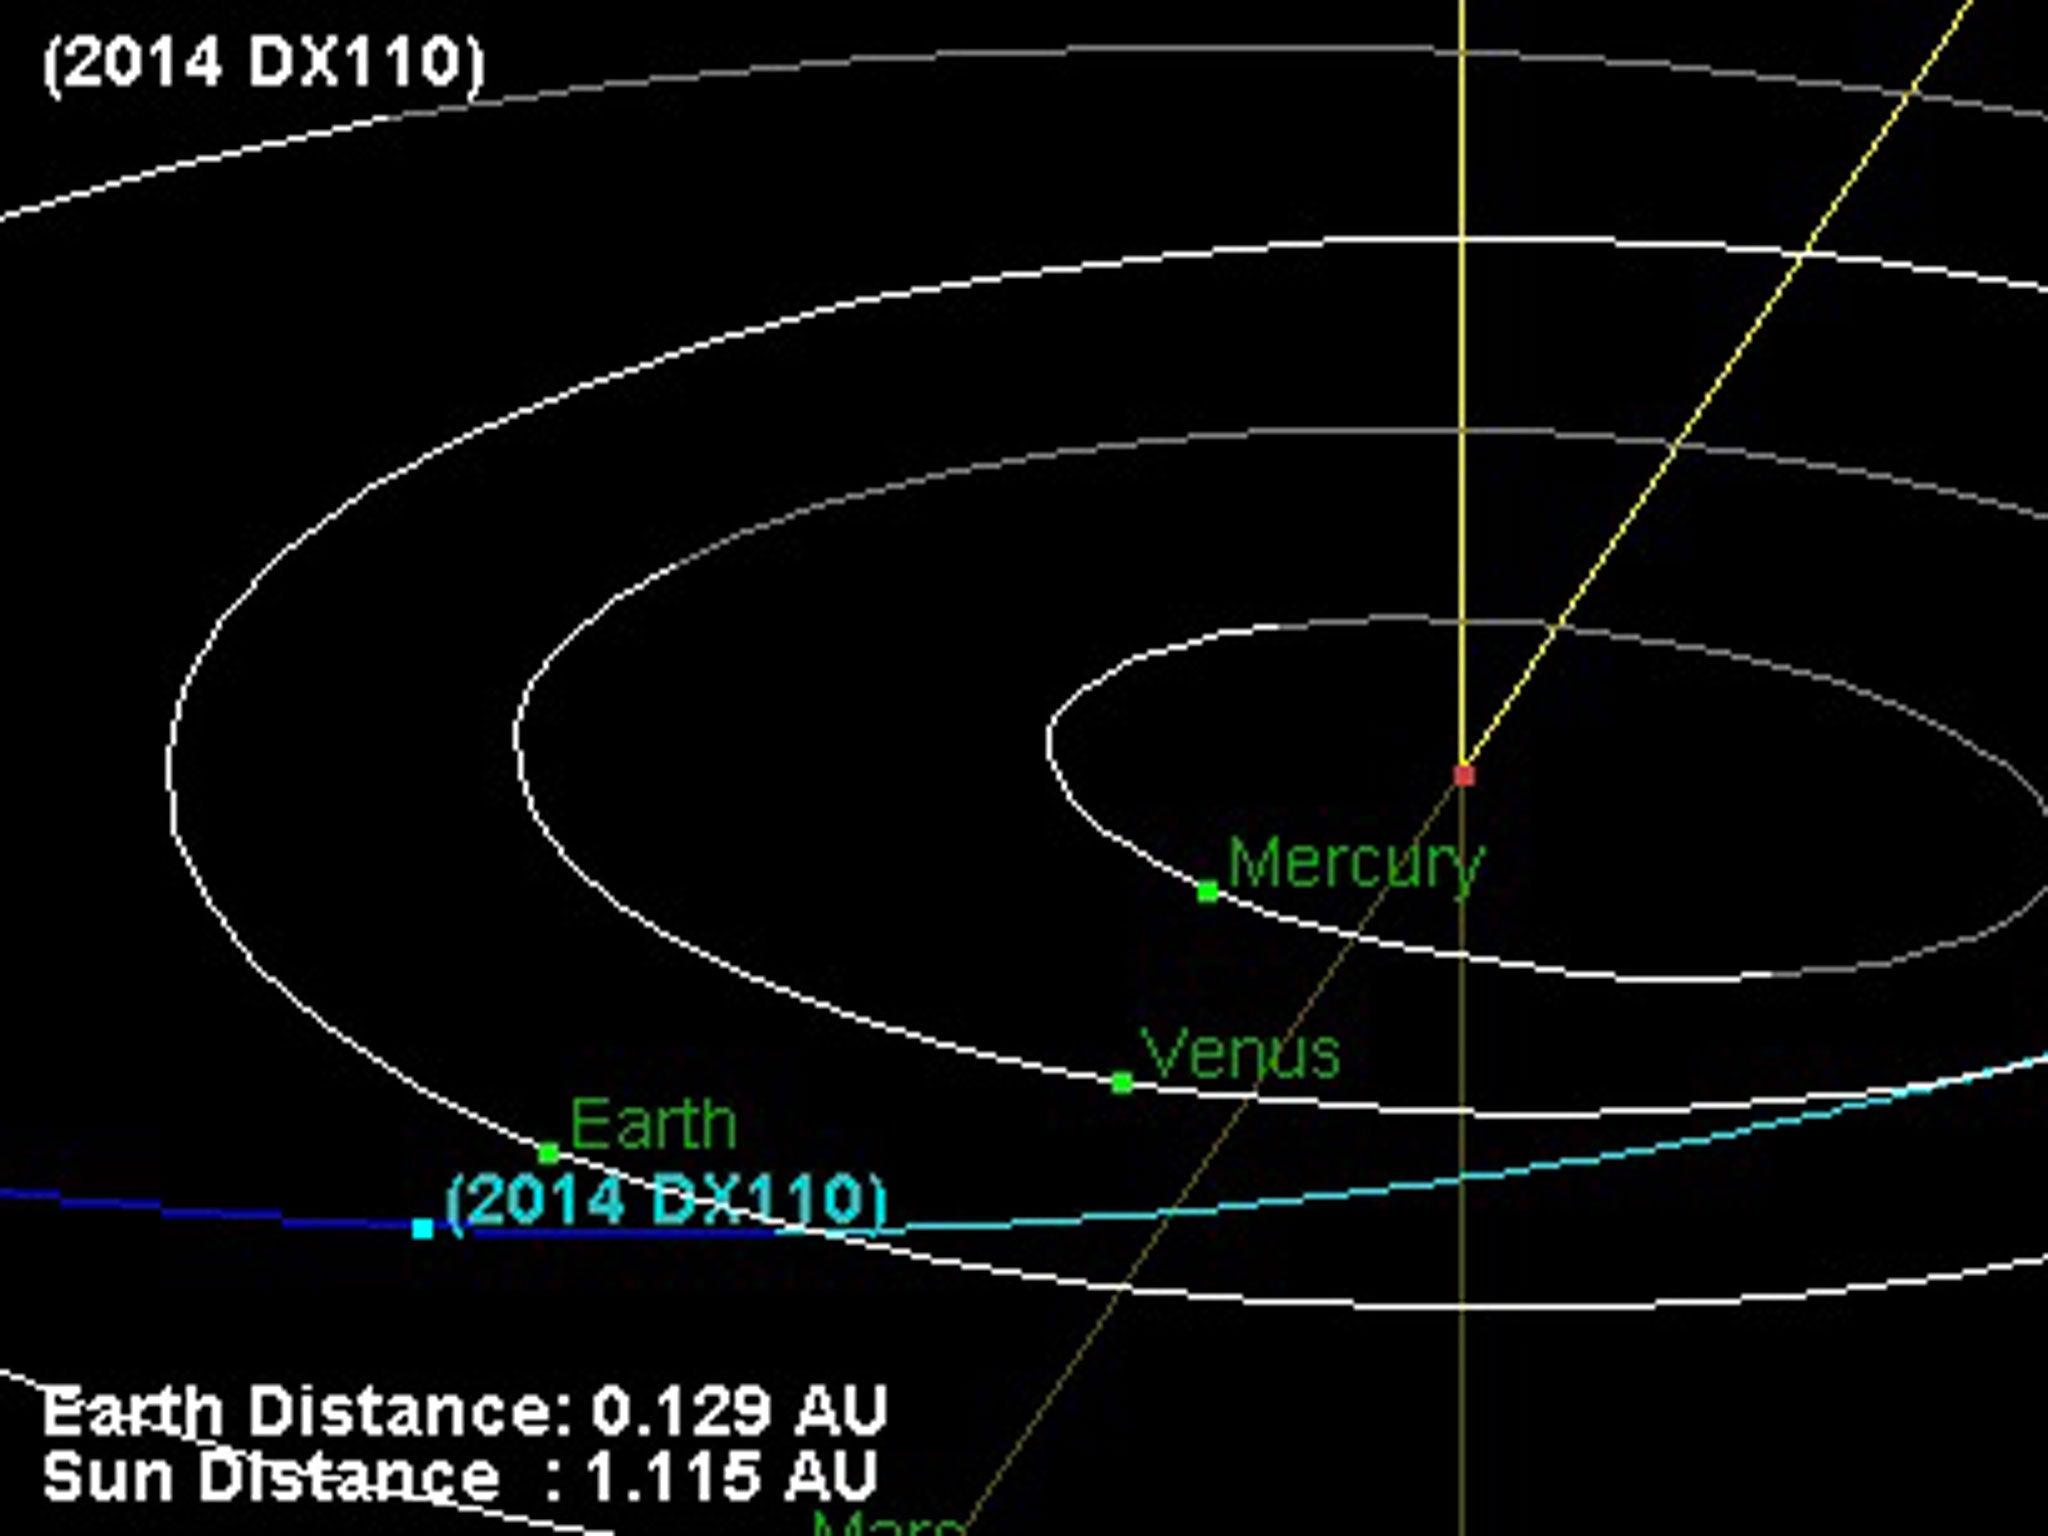 This image shows the relative locations of asteroid 2014 DX110 and Earth on March 4, 2014. The asteroid will make its closest approach to Earth on March 5